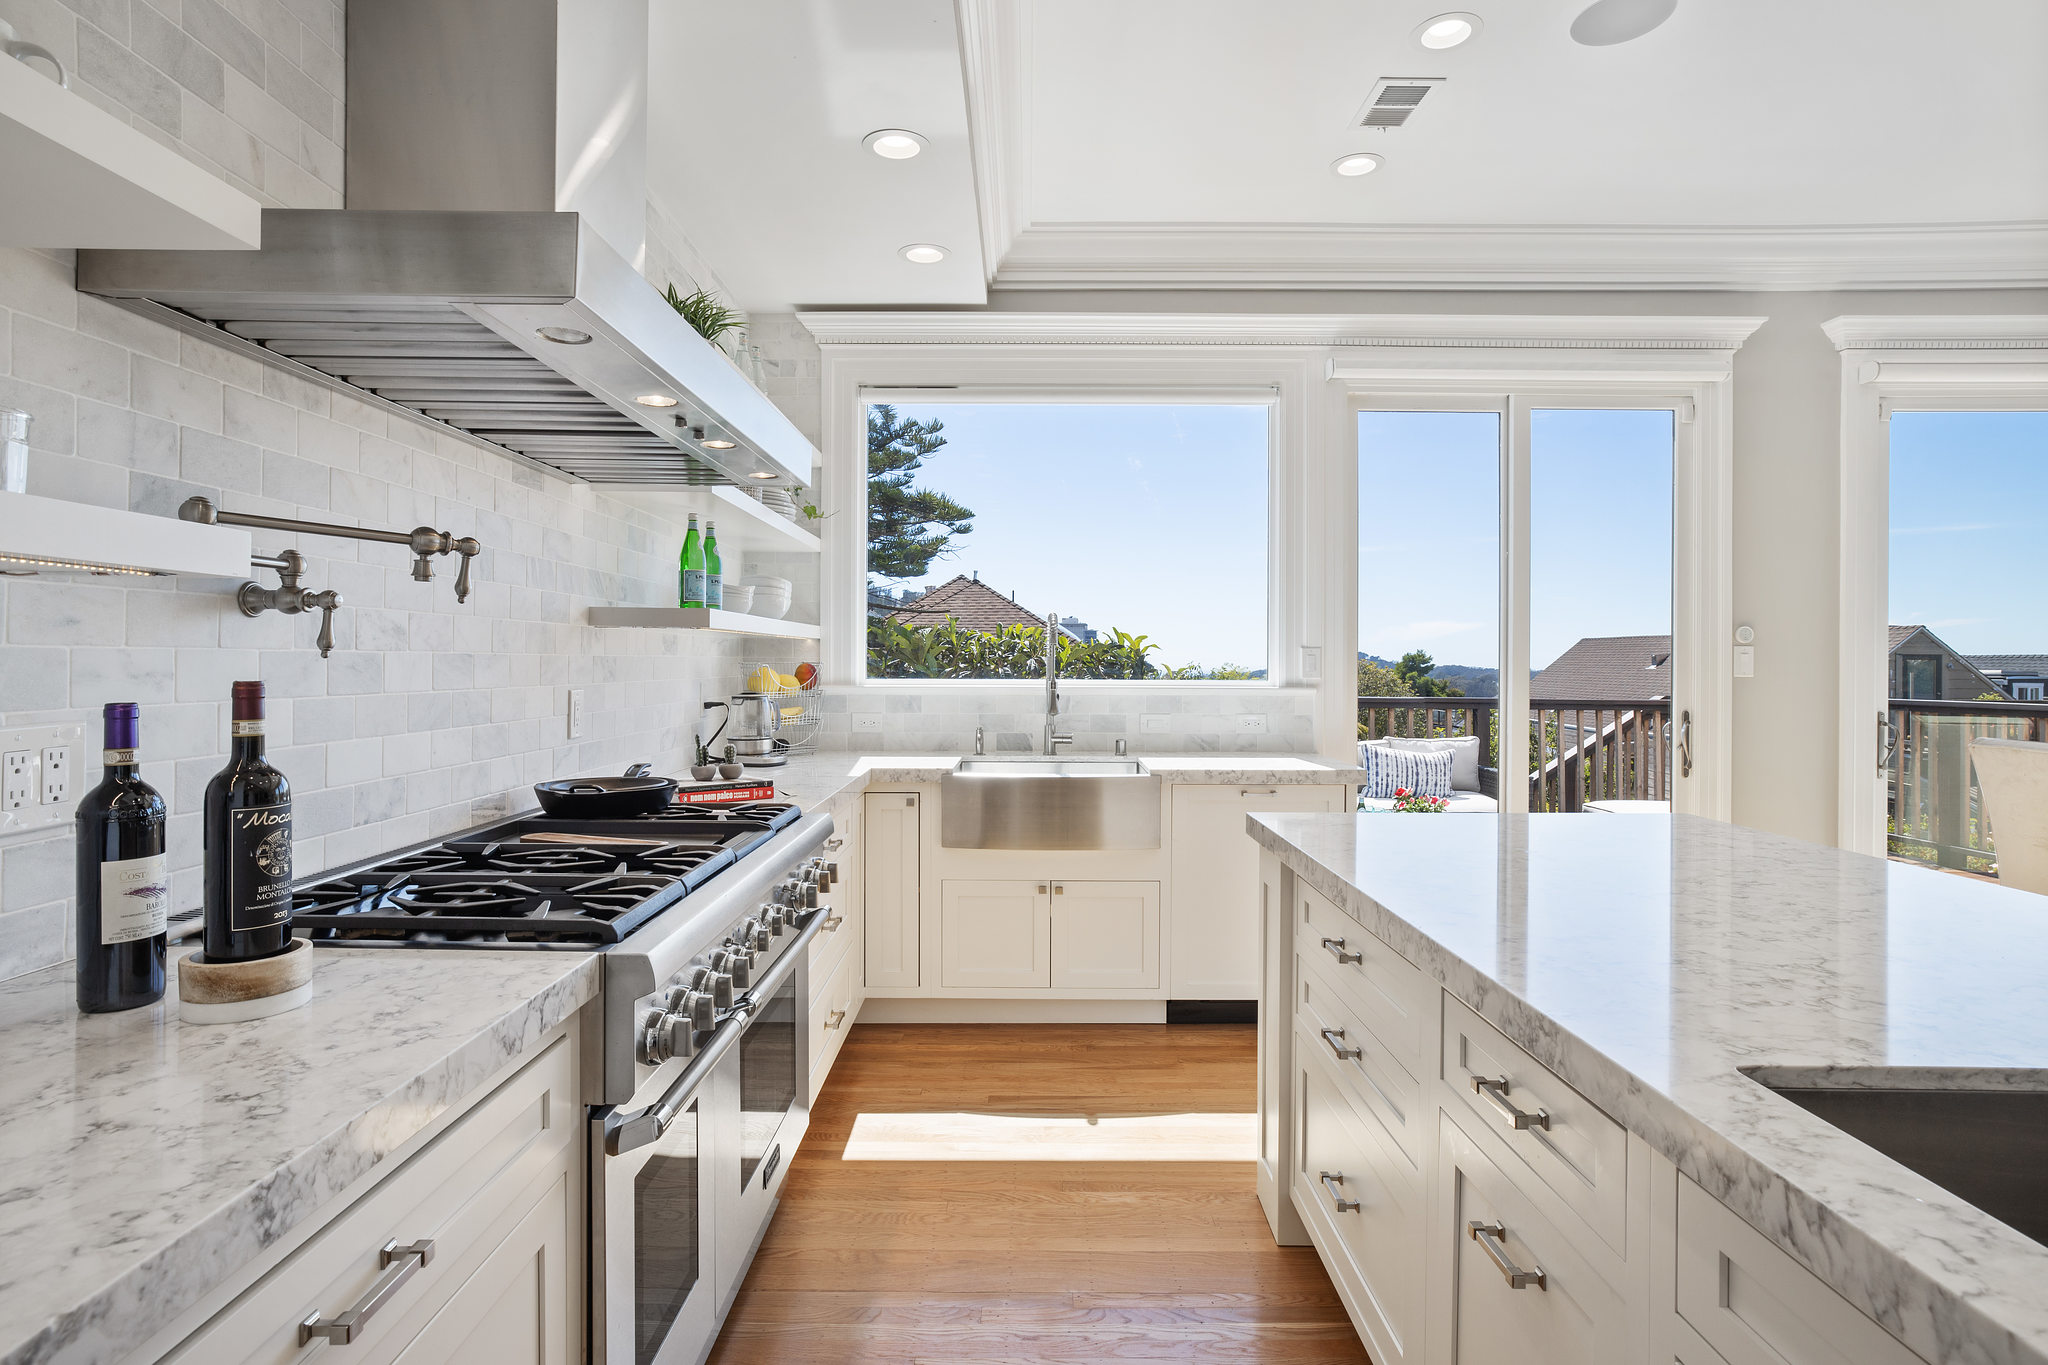 Property Photo: View of the kitchen, showing the high-end stainless steel stove, marble counters and sink